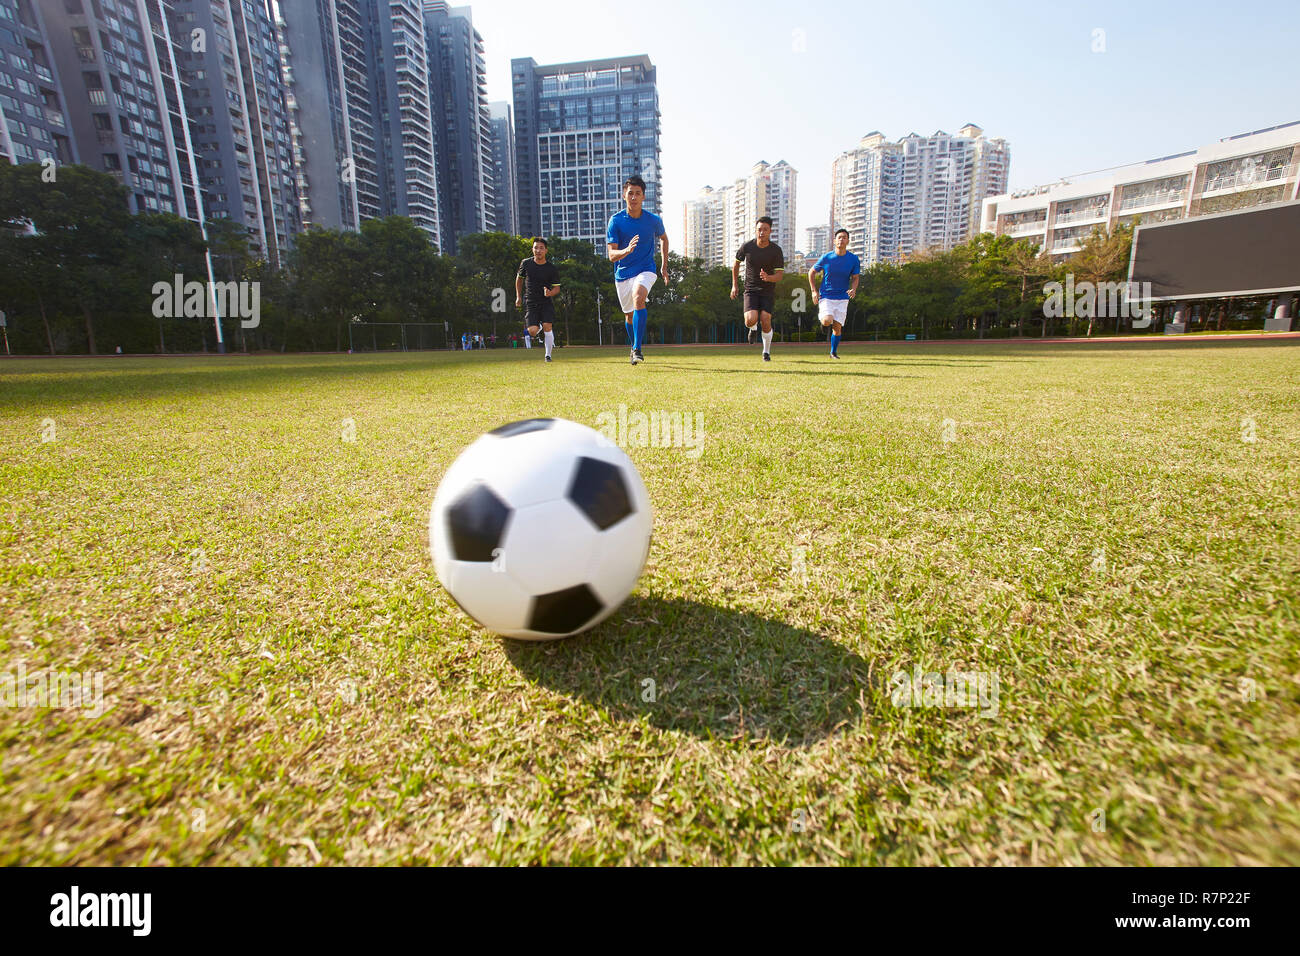 young asian soccer football players chasing the ball during a match Stock Photo